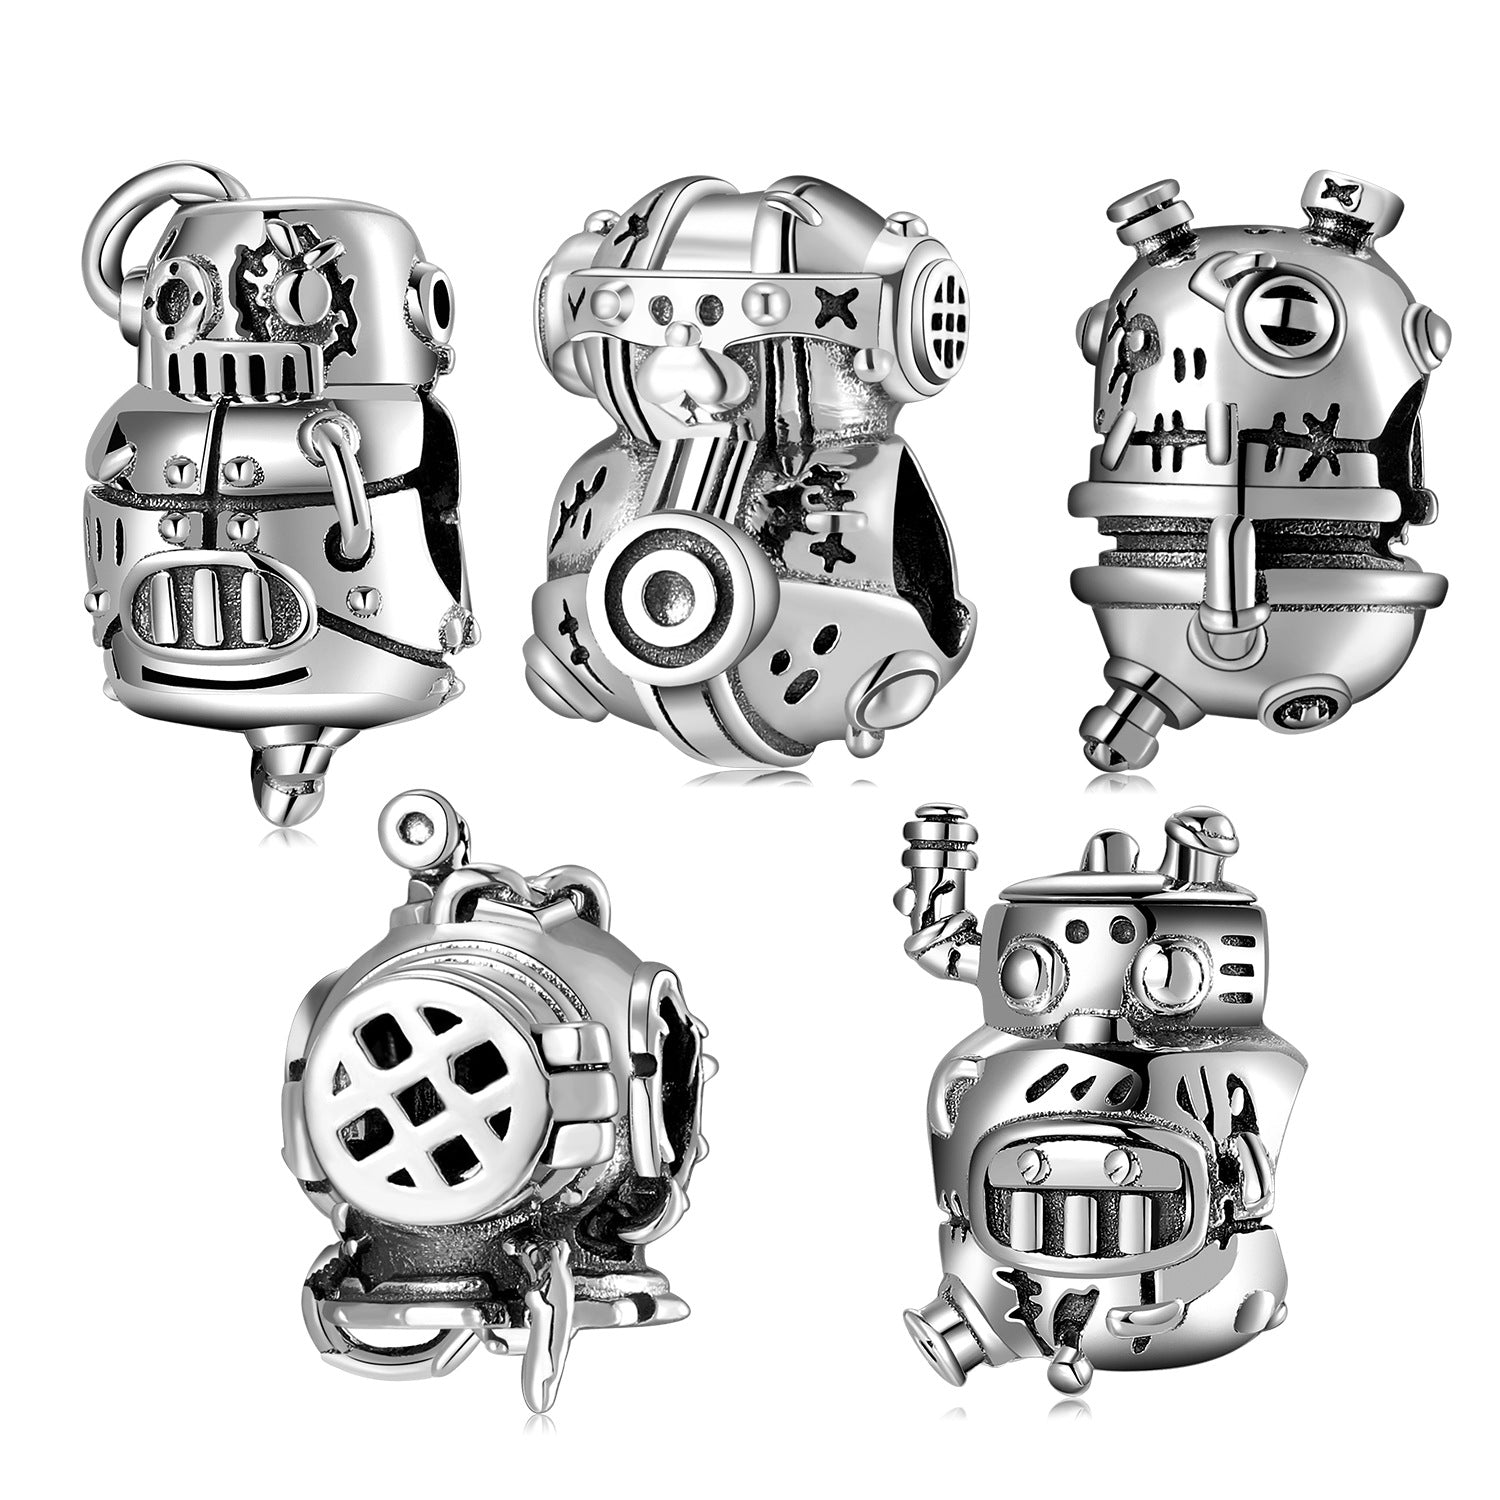 A group of Maramalive™ S925 Sterling Silver Creative Machinery Gothic Style Beads Charm Bracelet DIY Accessories Beads for fashion women.